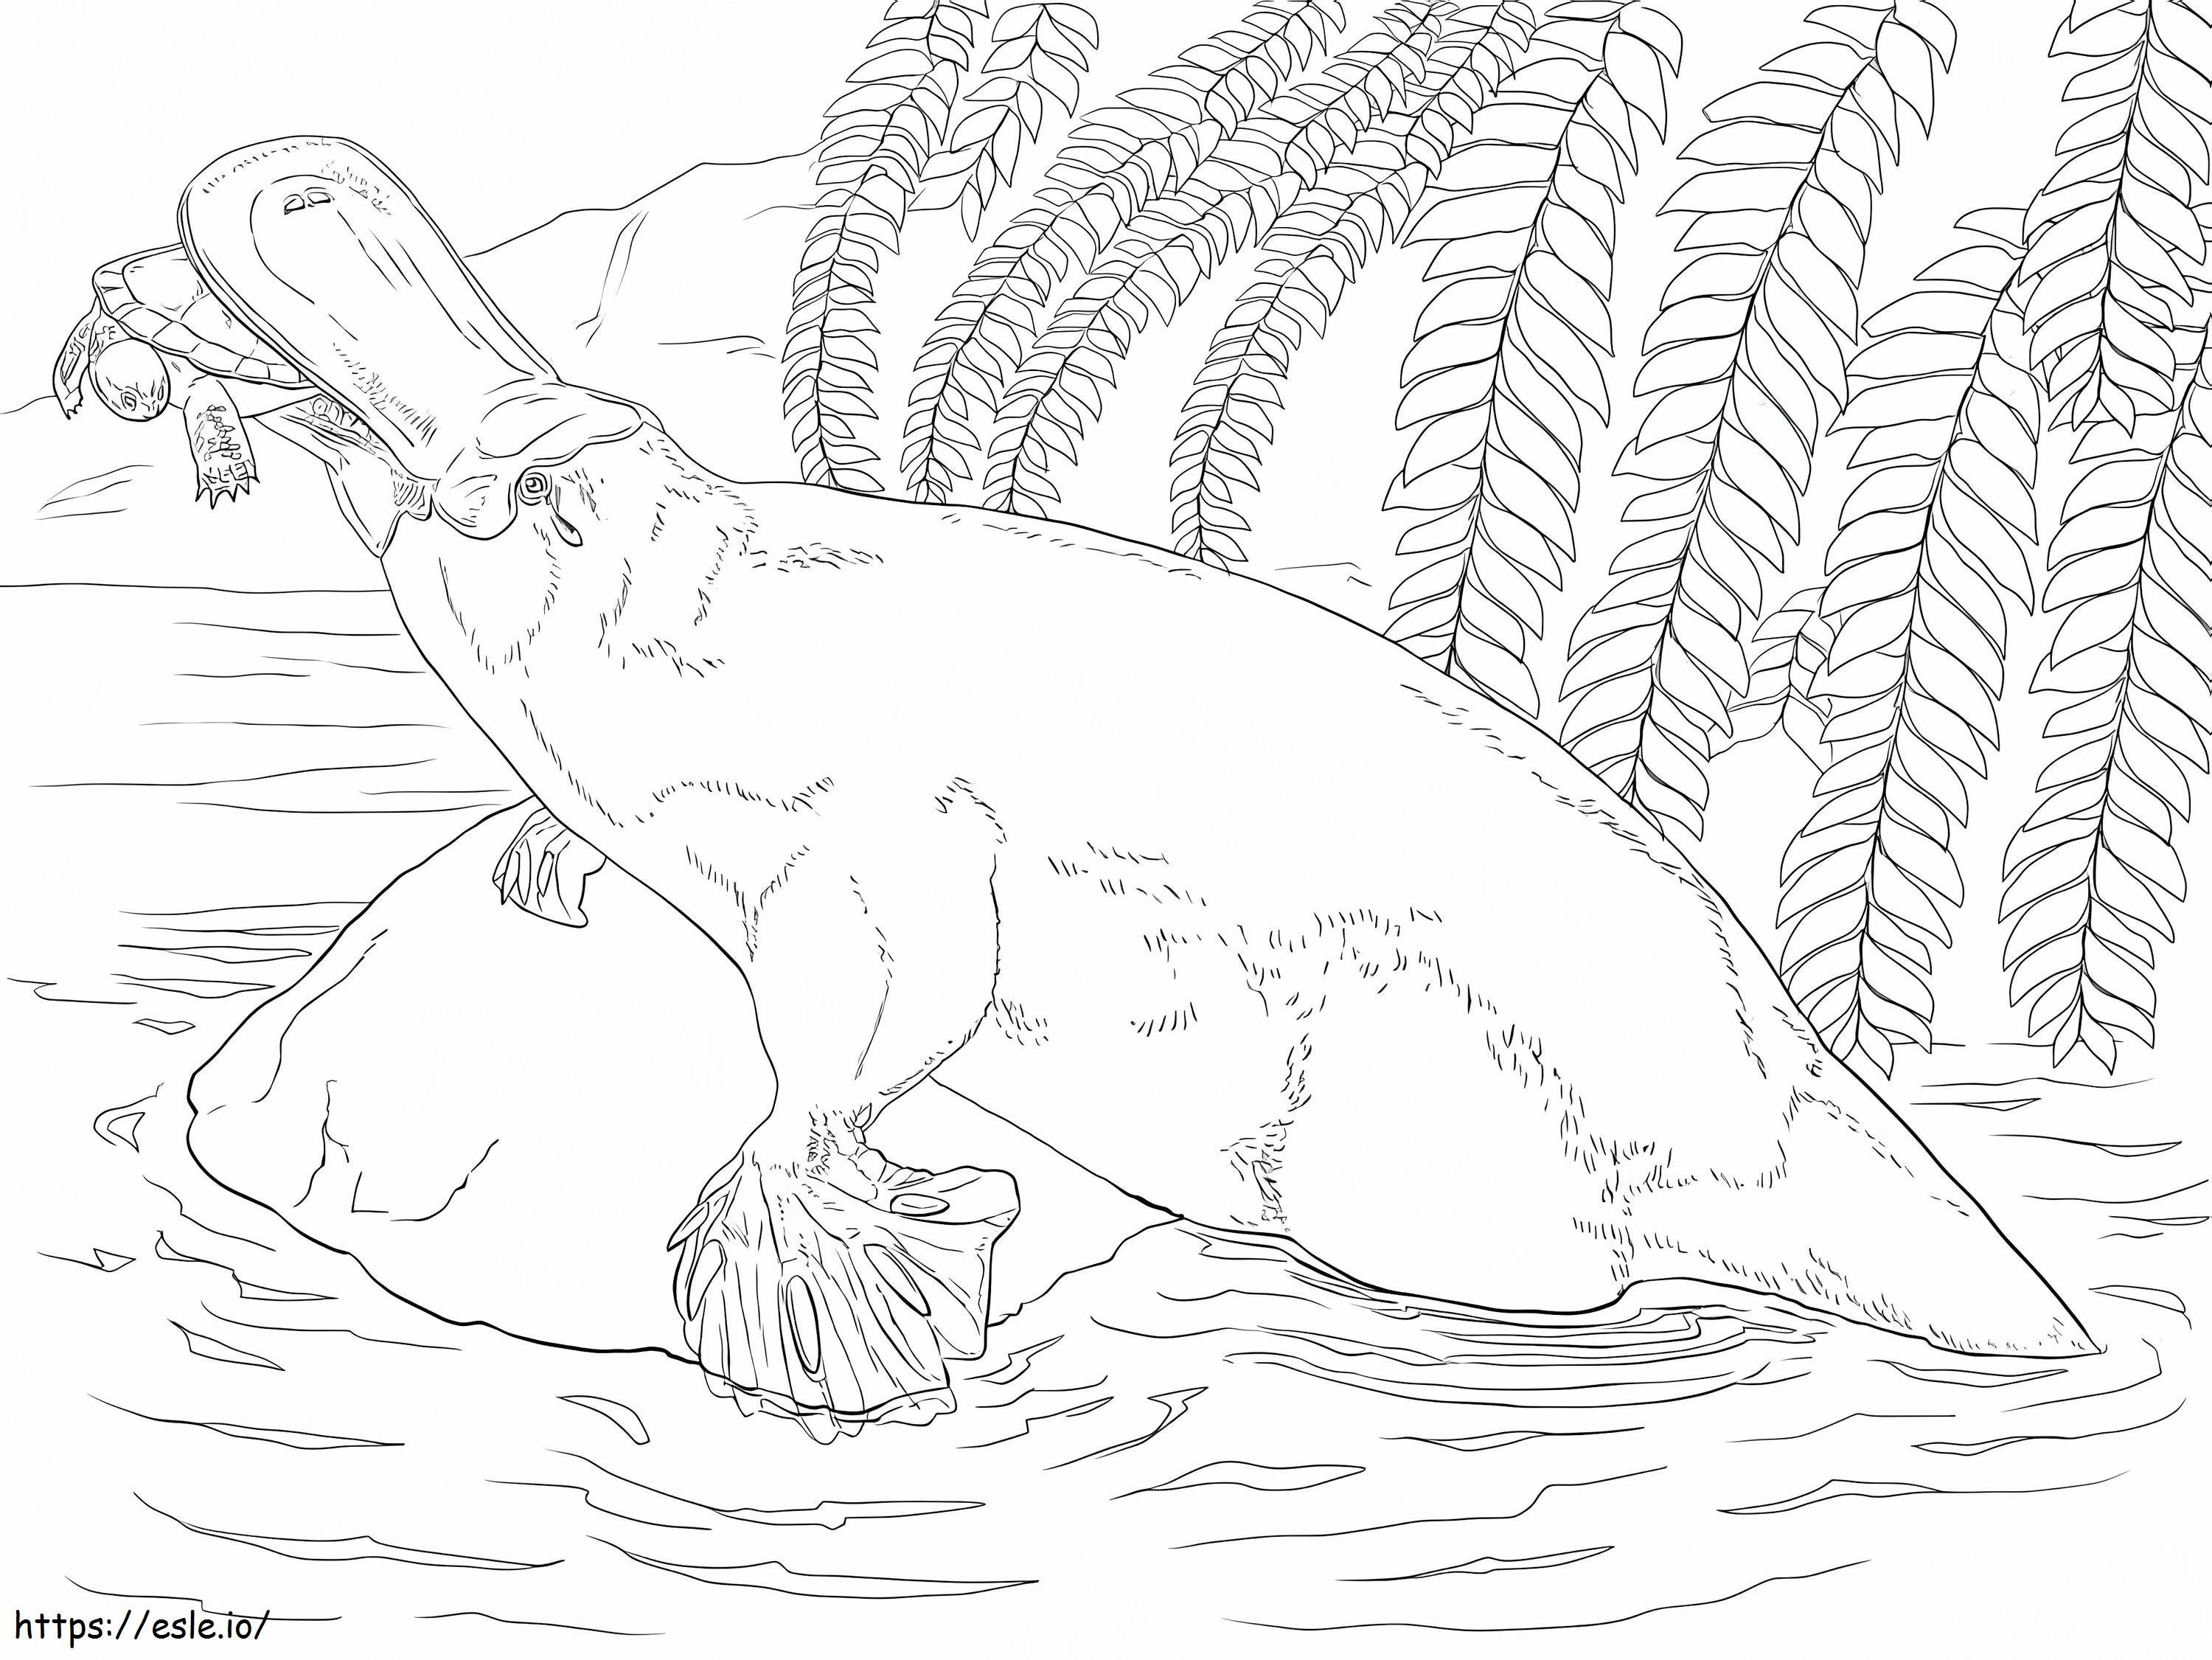 Platypus And Turtle coloring page